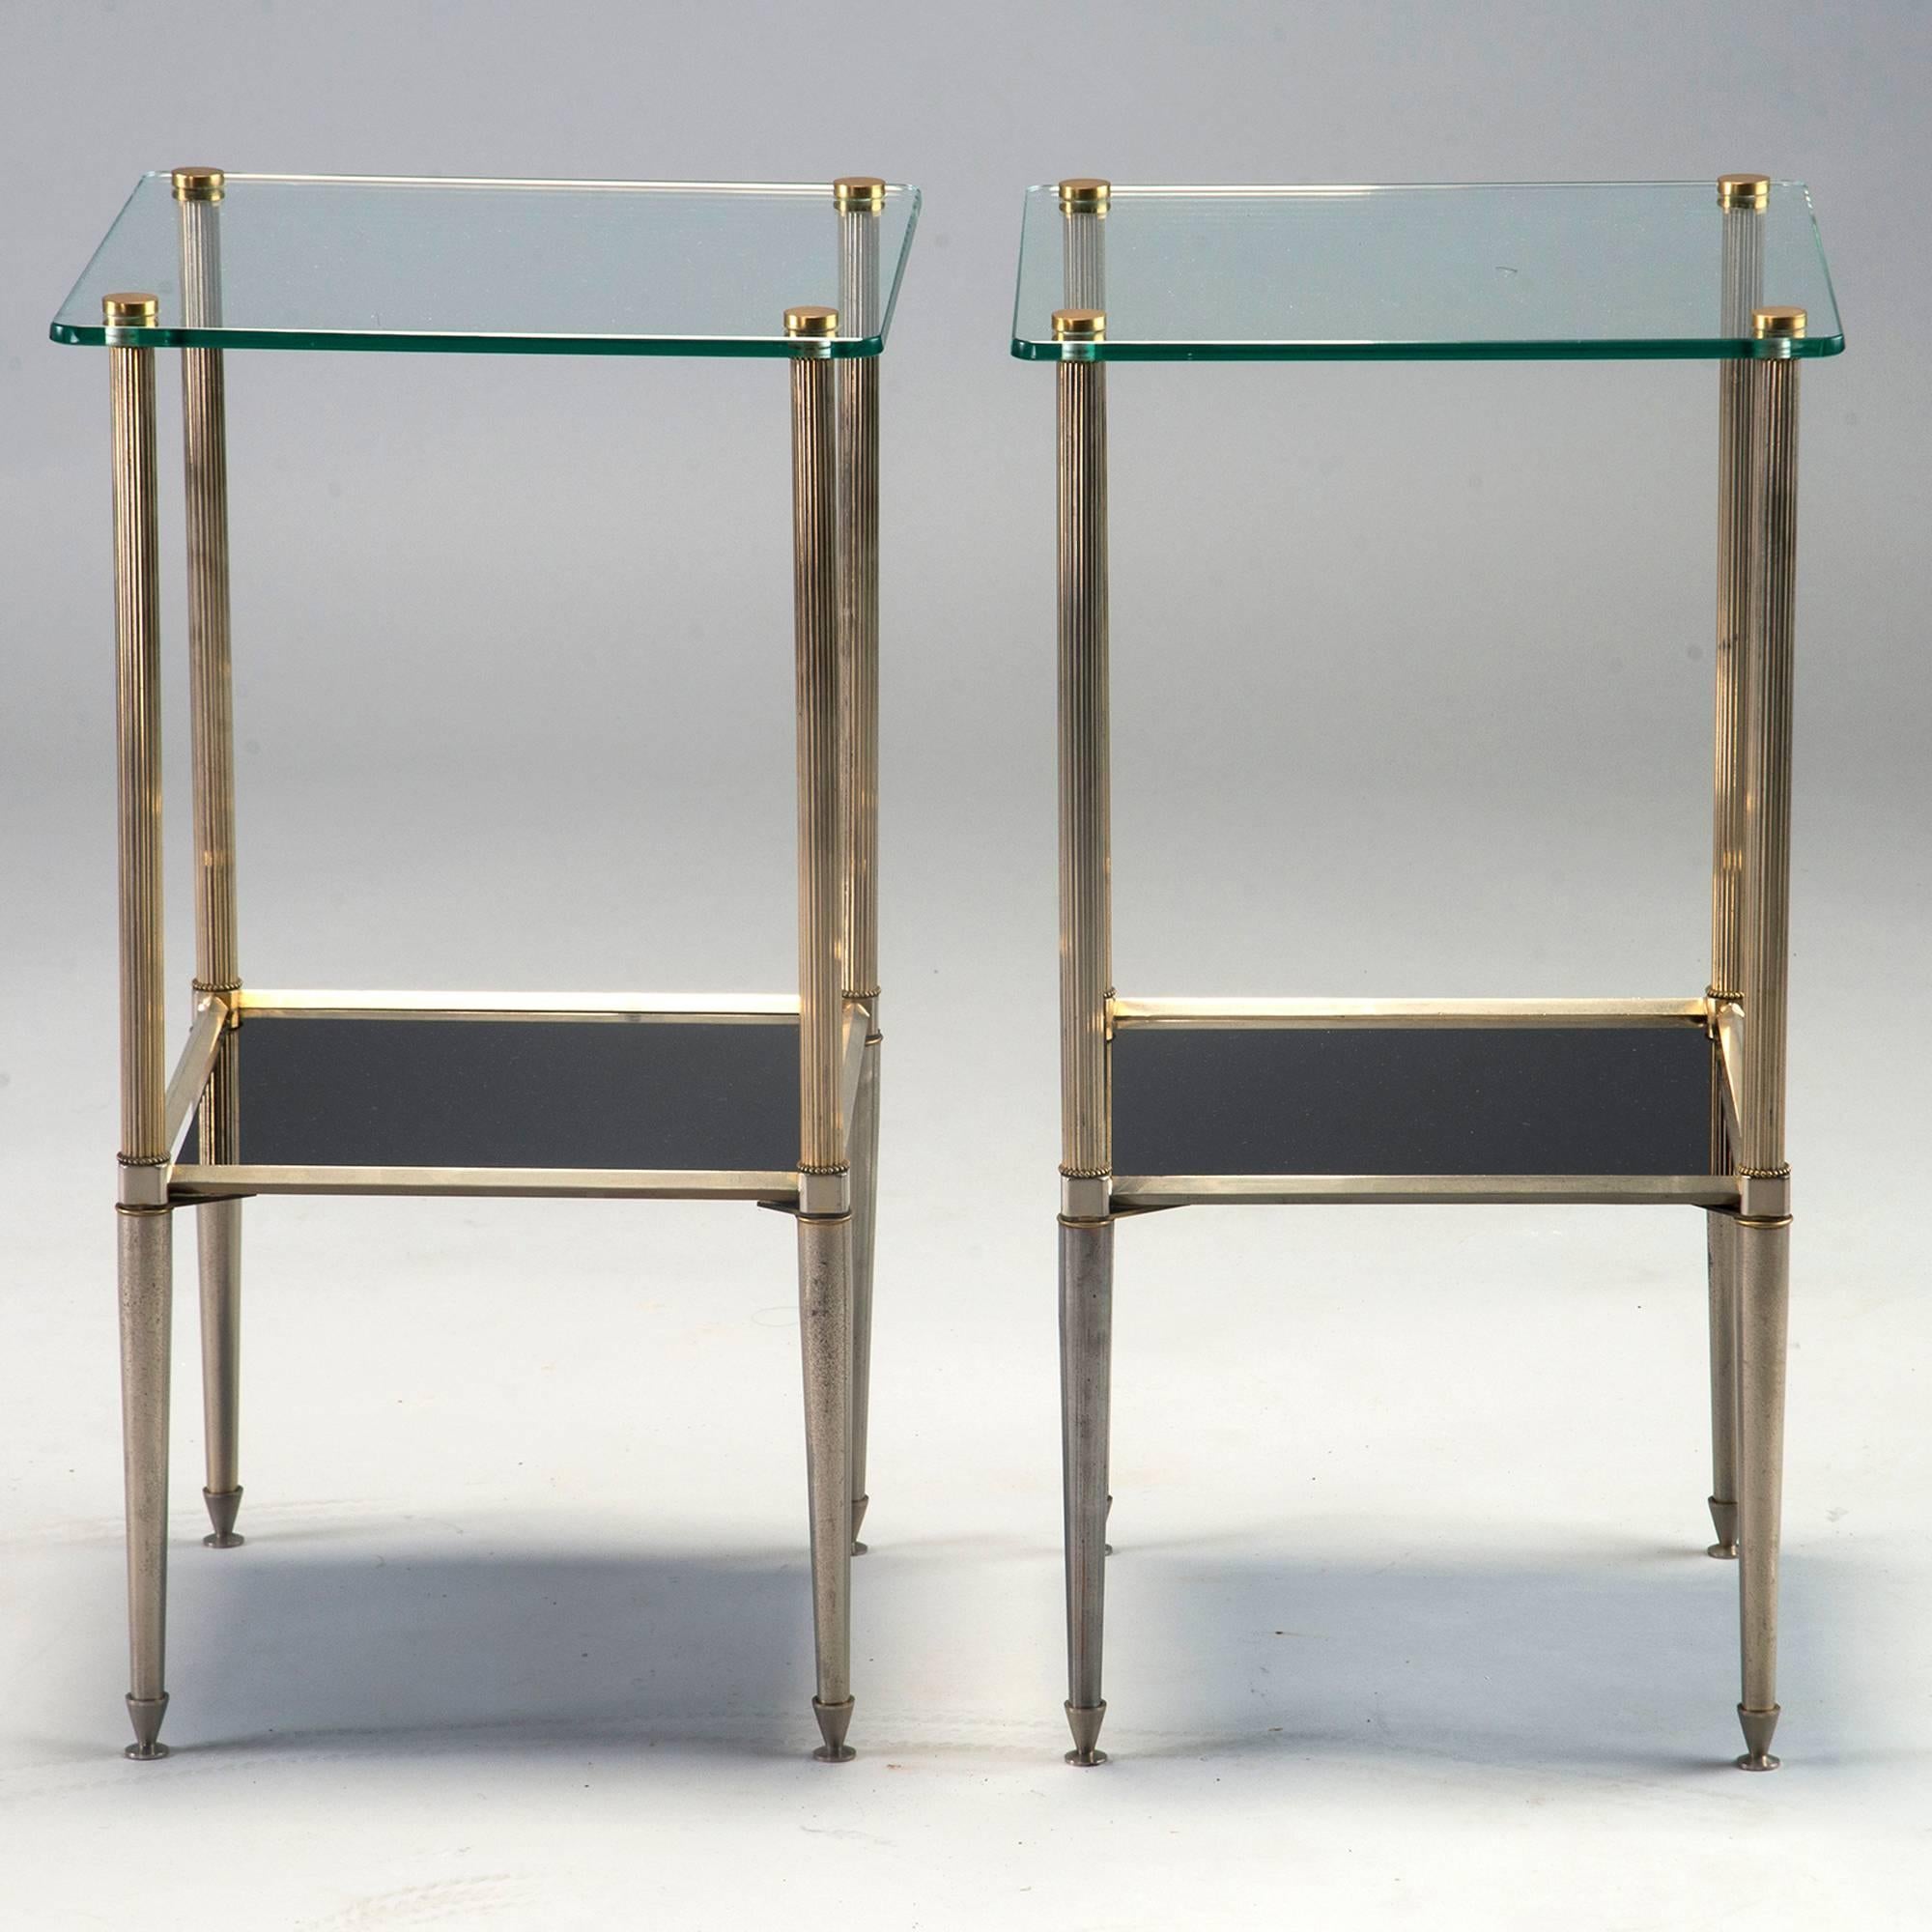 Pair of two-tier side tables, circa 1970s. Reeded brass legs support tops of clear glass and silvered metal supports lower tier of black glass. Unknown maker, found in France. Sold and priced as a pair.